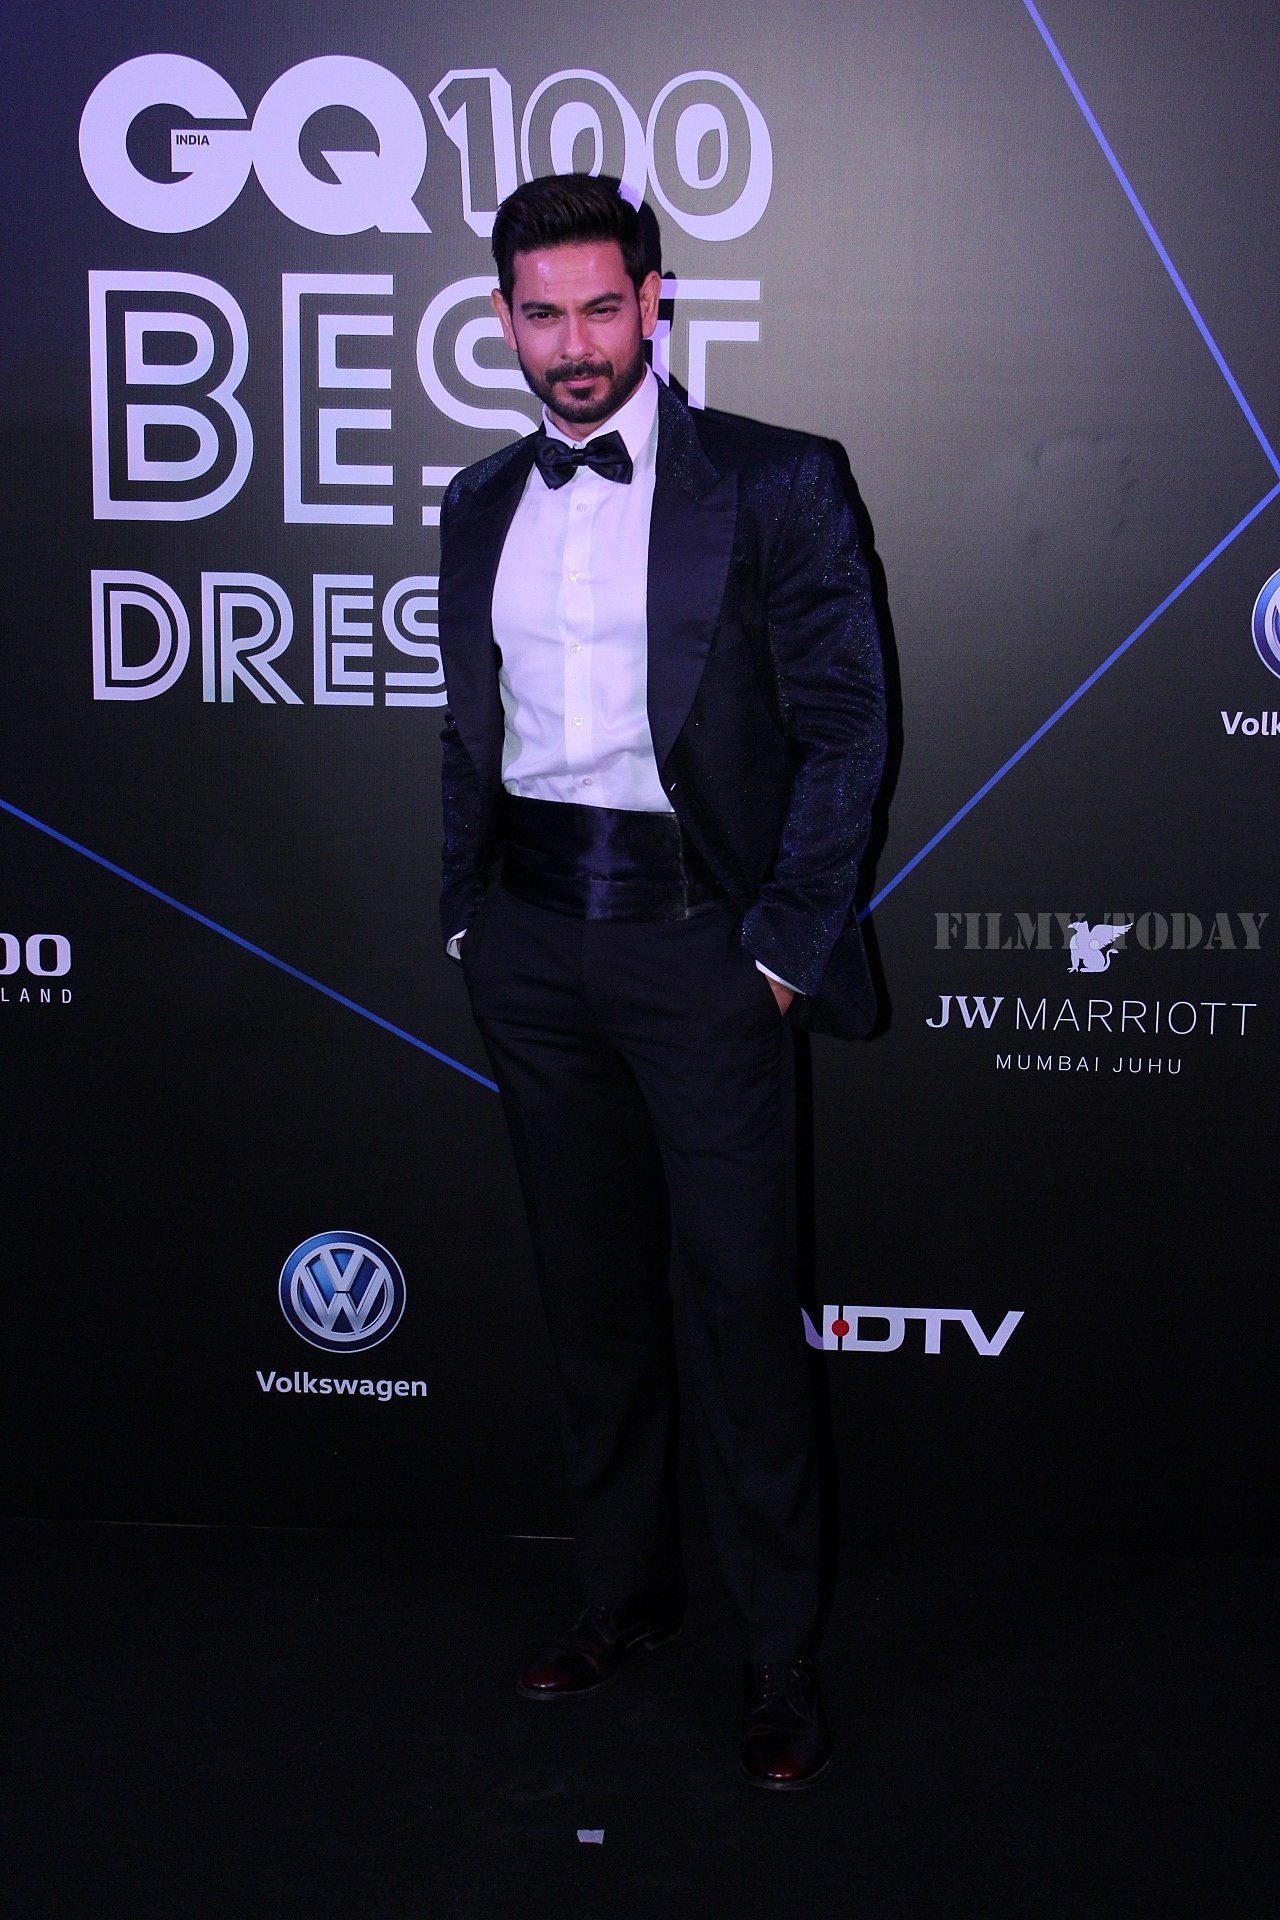 Photos: Star Studded Red Carpet Of Gq 100 Best Dressed 2019 | Picture 1651316